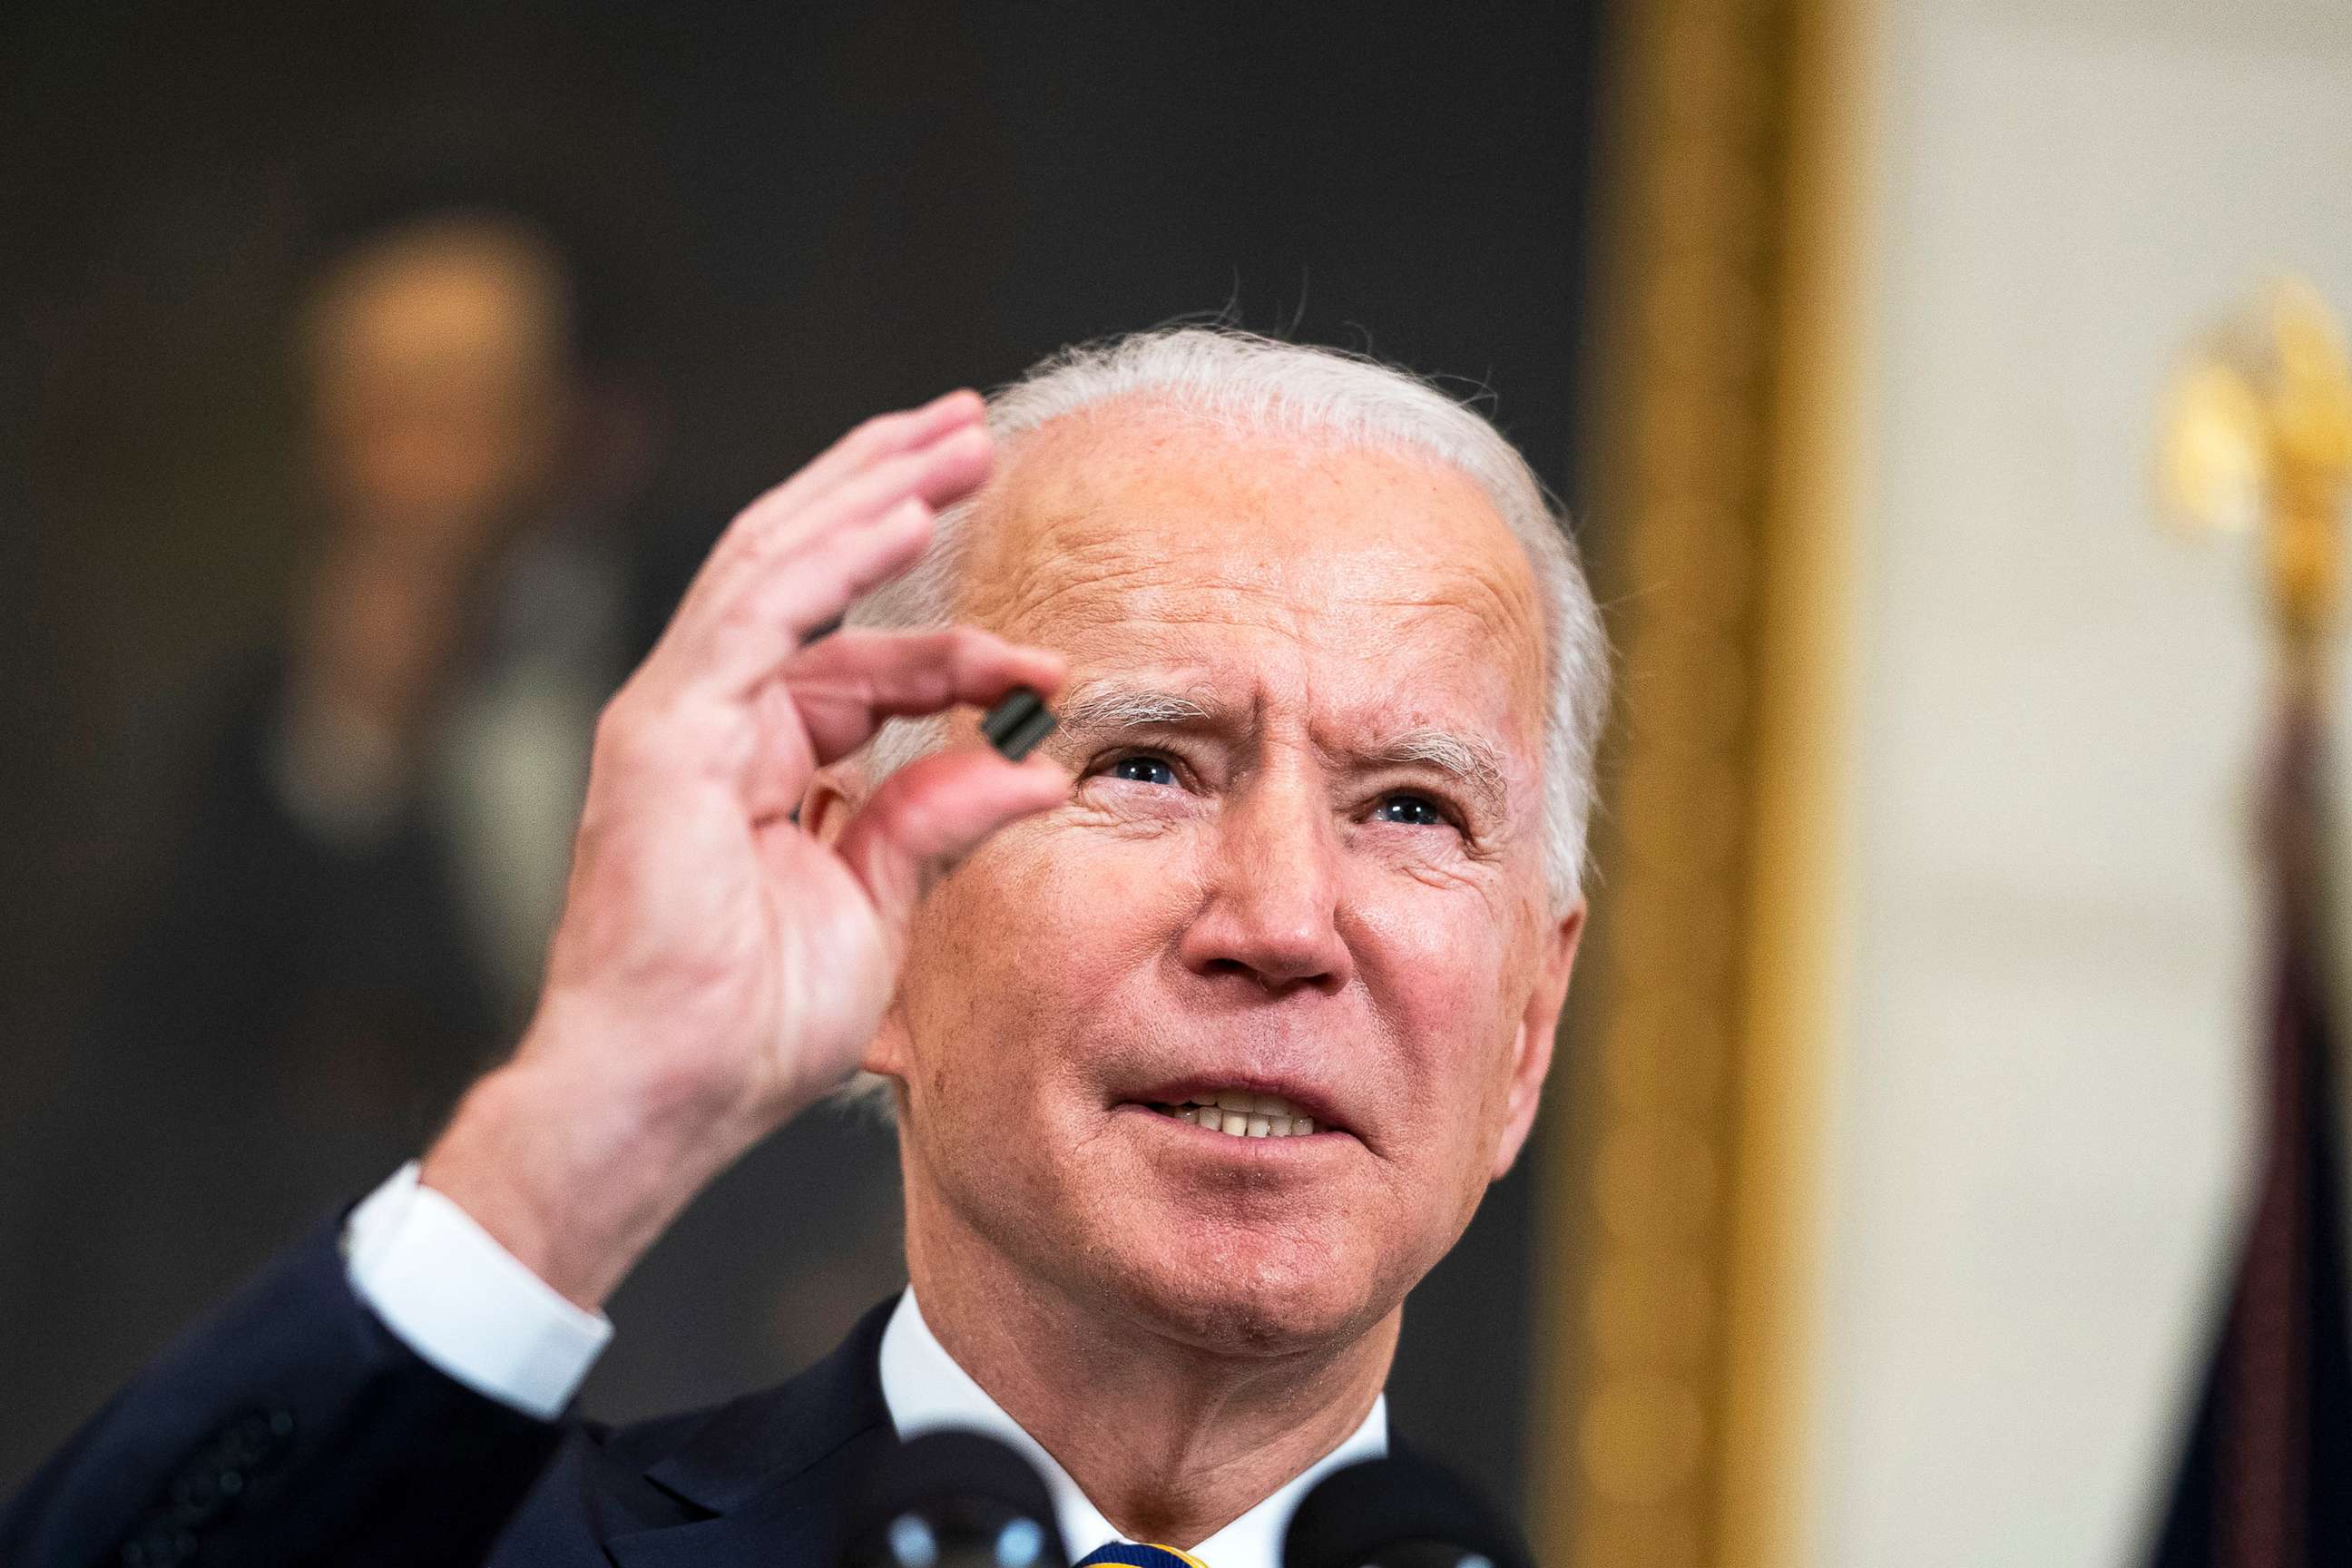 PHOTO: President Joe Biden holds a semiconductor during his remarks before signing an Executive Order on the economy in the State Dining Room of the White House, Feb. 24, 2021. 